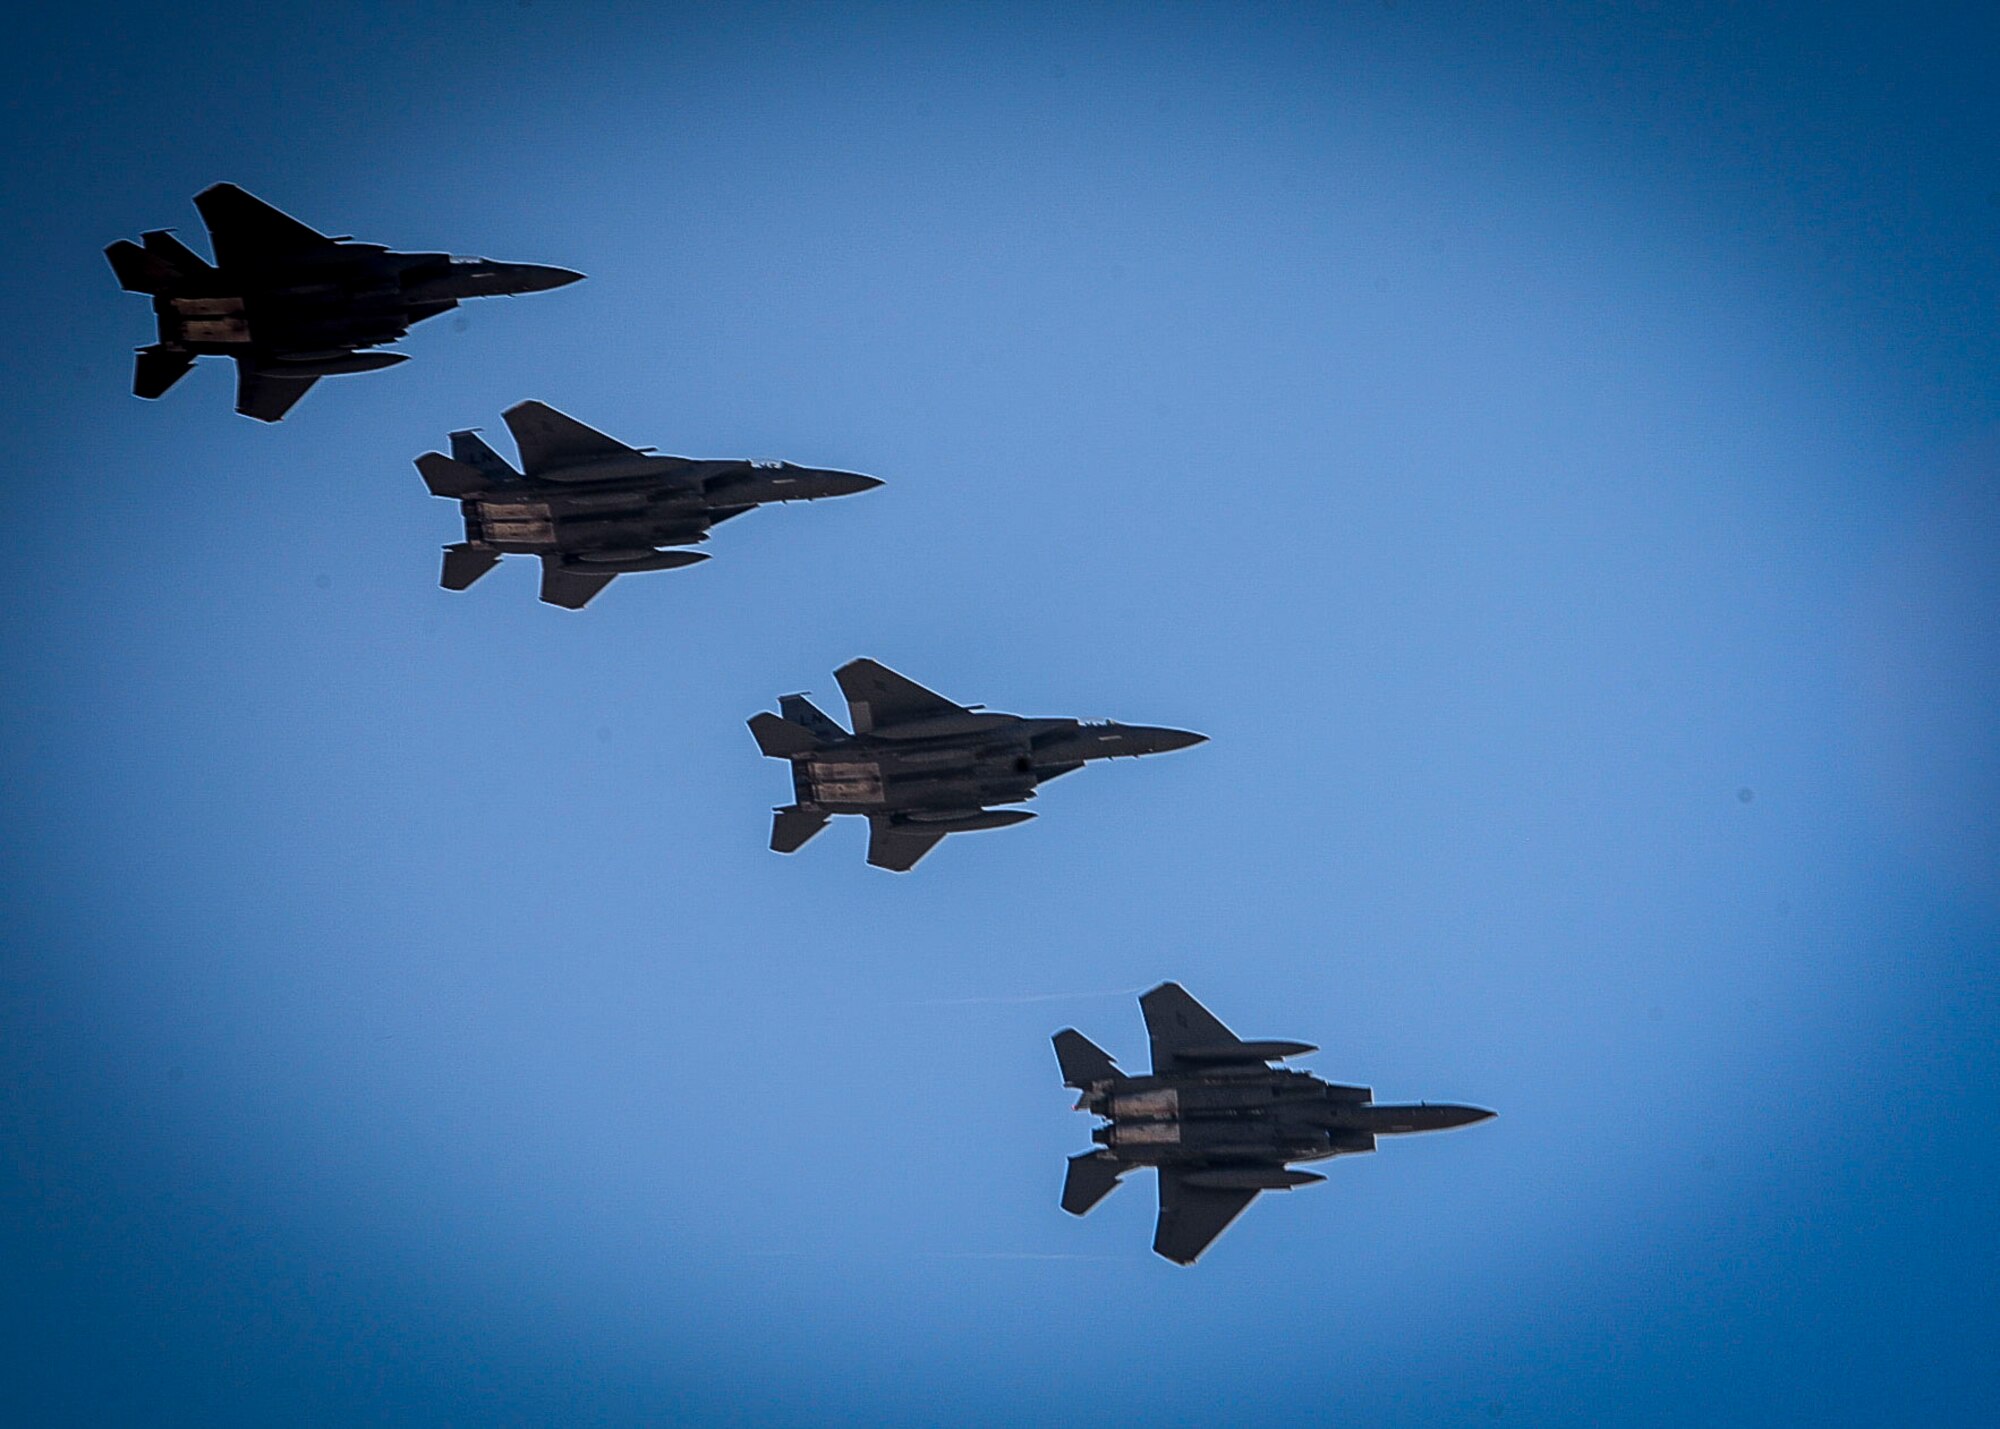 Four F-15E Strike Eagles fly over an undisclosed location in Southwest Asia, April 7, 2017. The jets are deployed from the 492nd Fighter Squadron at RAF Lakenheath, England. These Strike Eagles have taken over for those that belong to the 389th Expeditionary Fighter Squadron that was deployed to the 332nd Air Expeditionary Wing for the last six months. (U.S. Air Force photo by Tech Sgt. Eboni Reams)